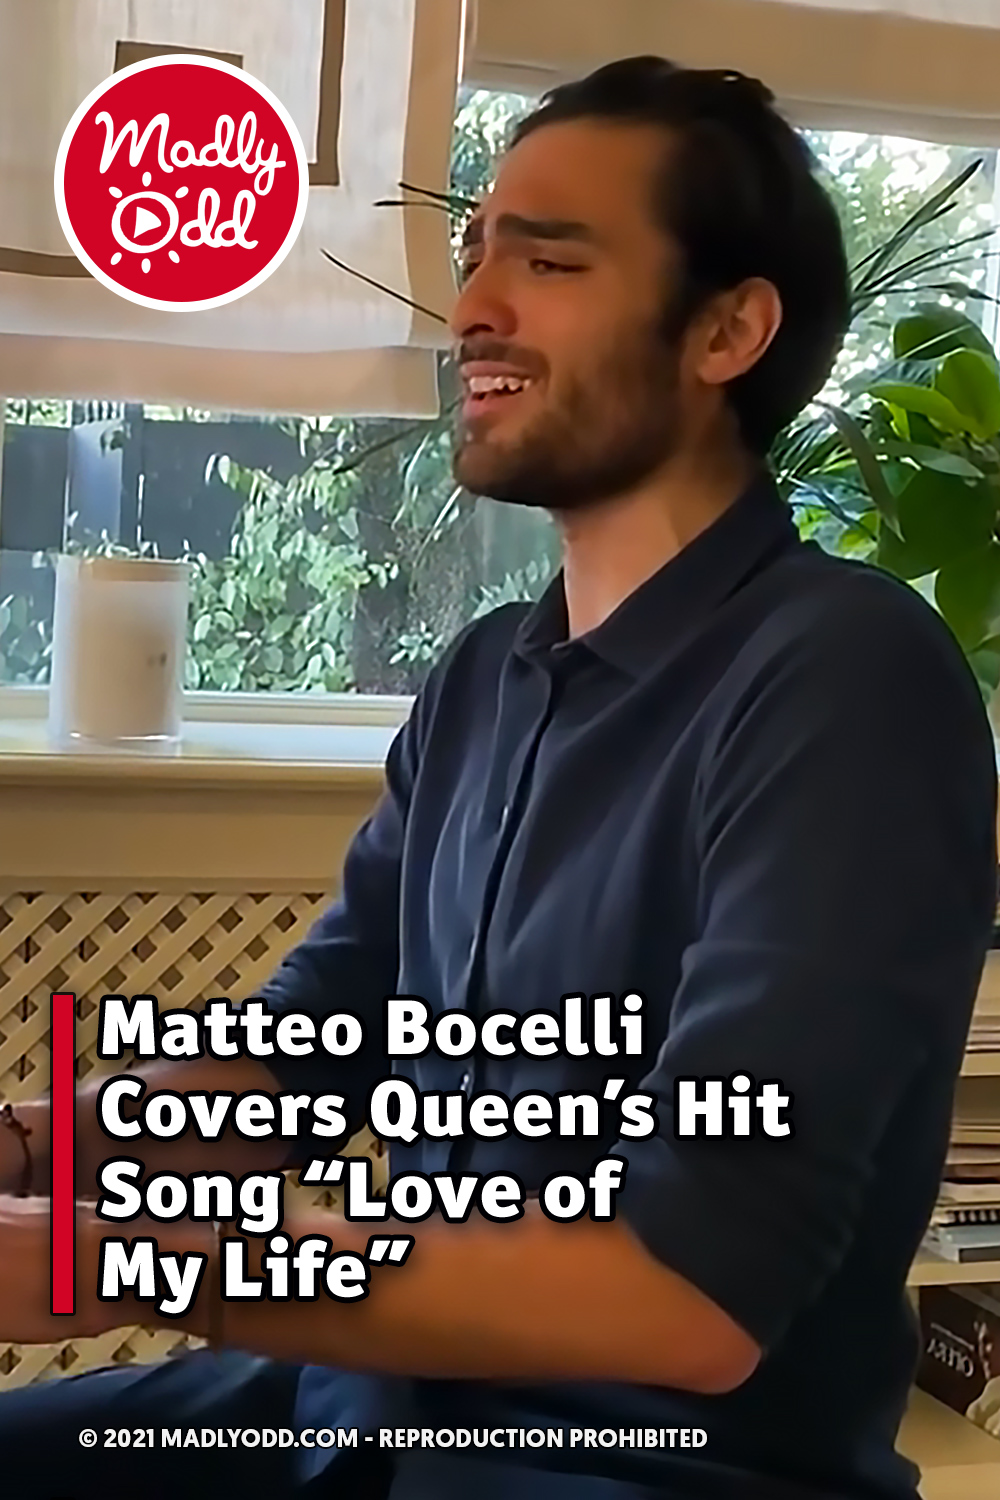 Matteo Bocelli Covers Queen’s Hit Song “Love of My Life”